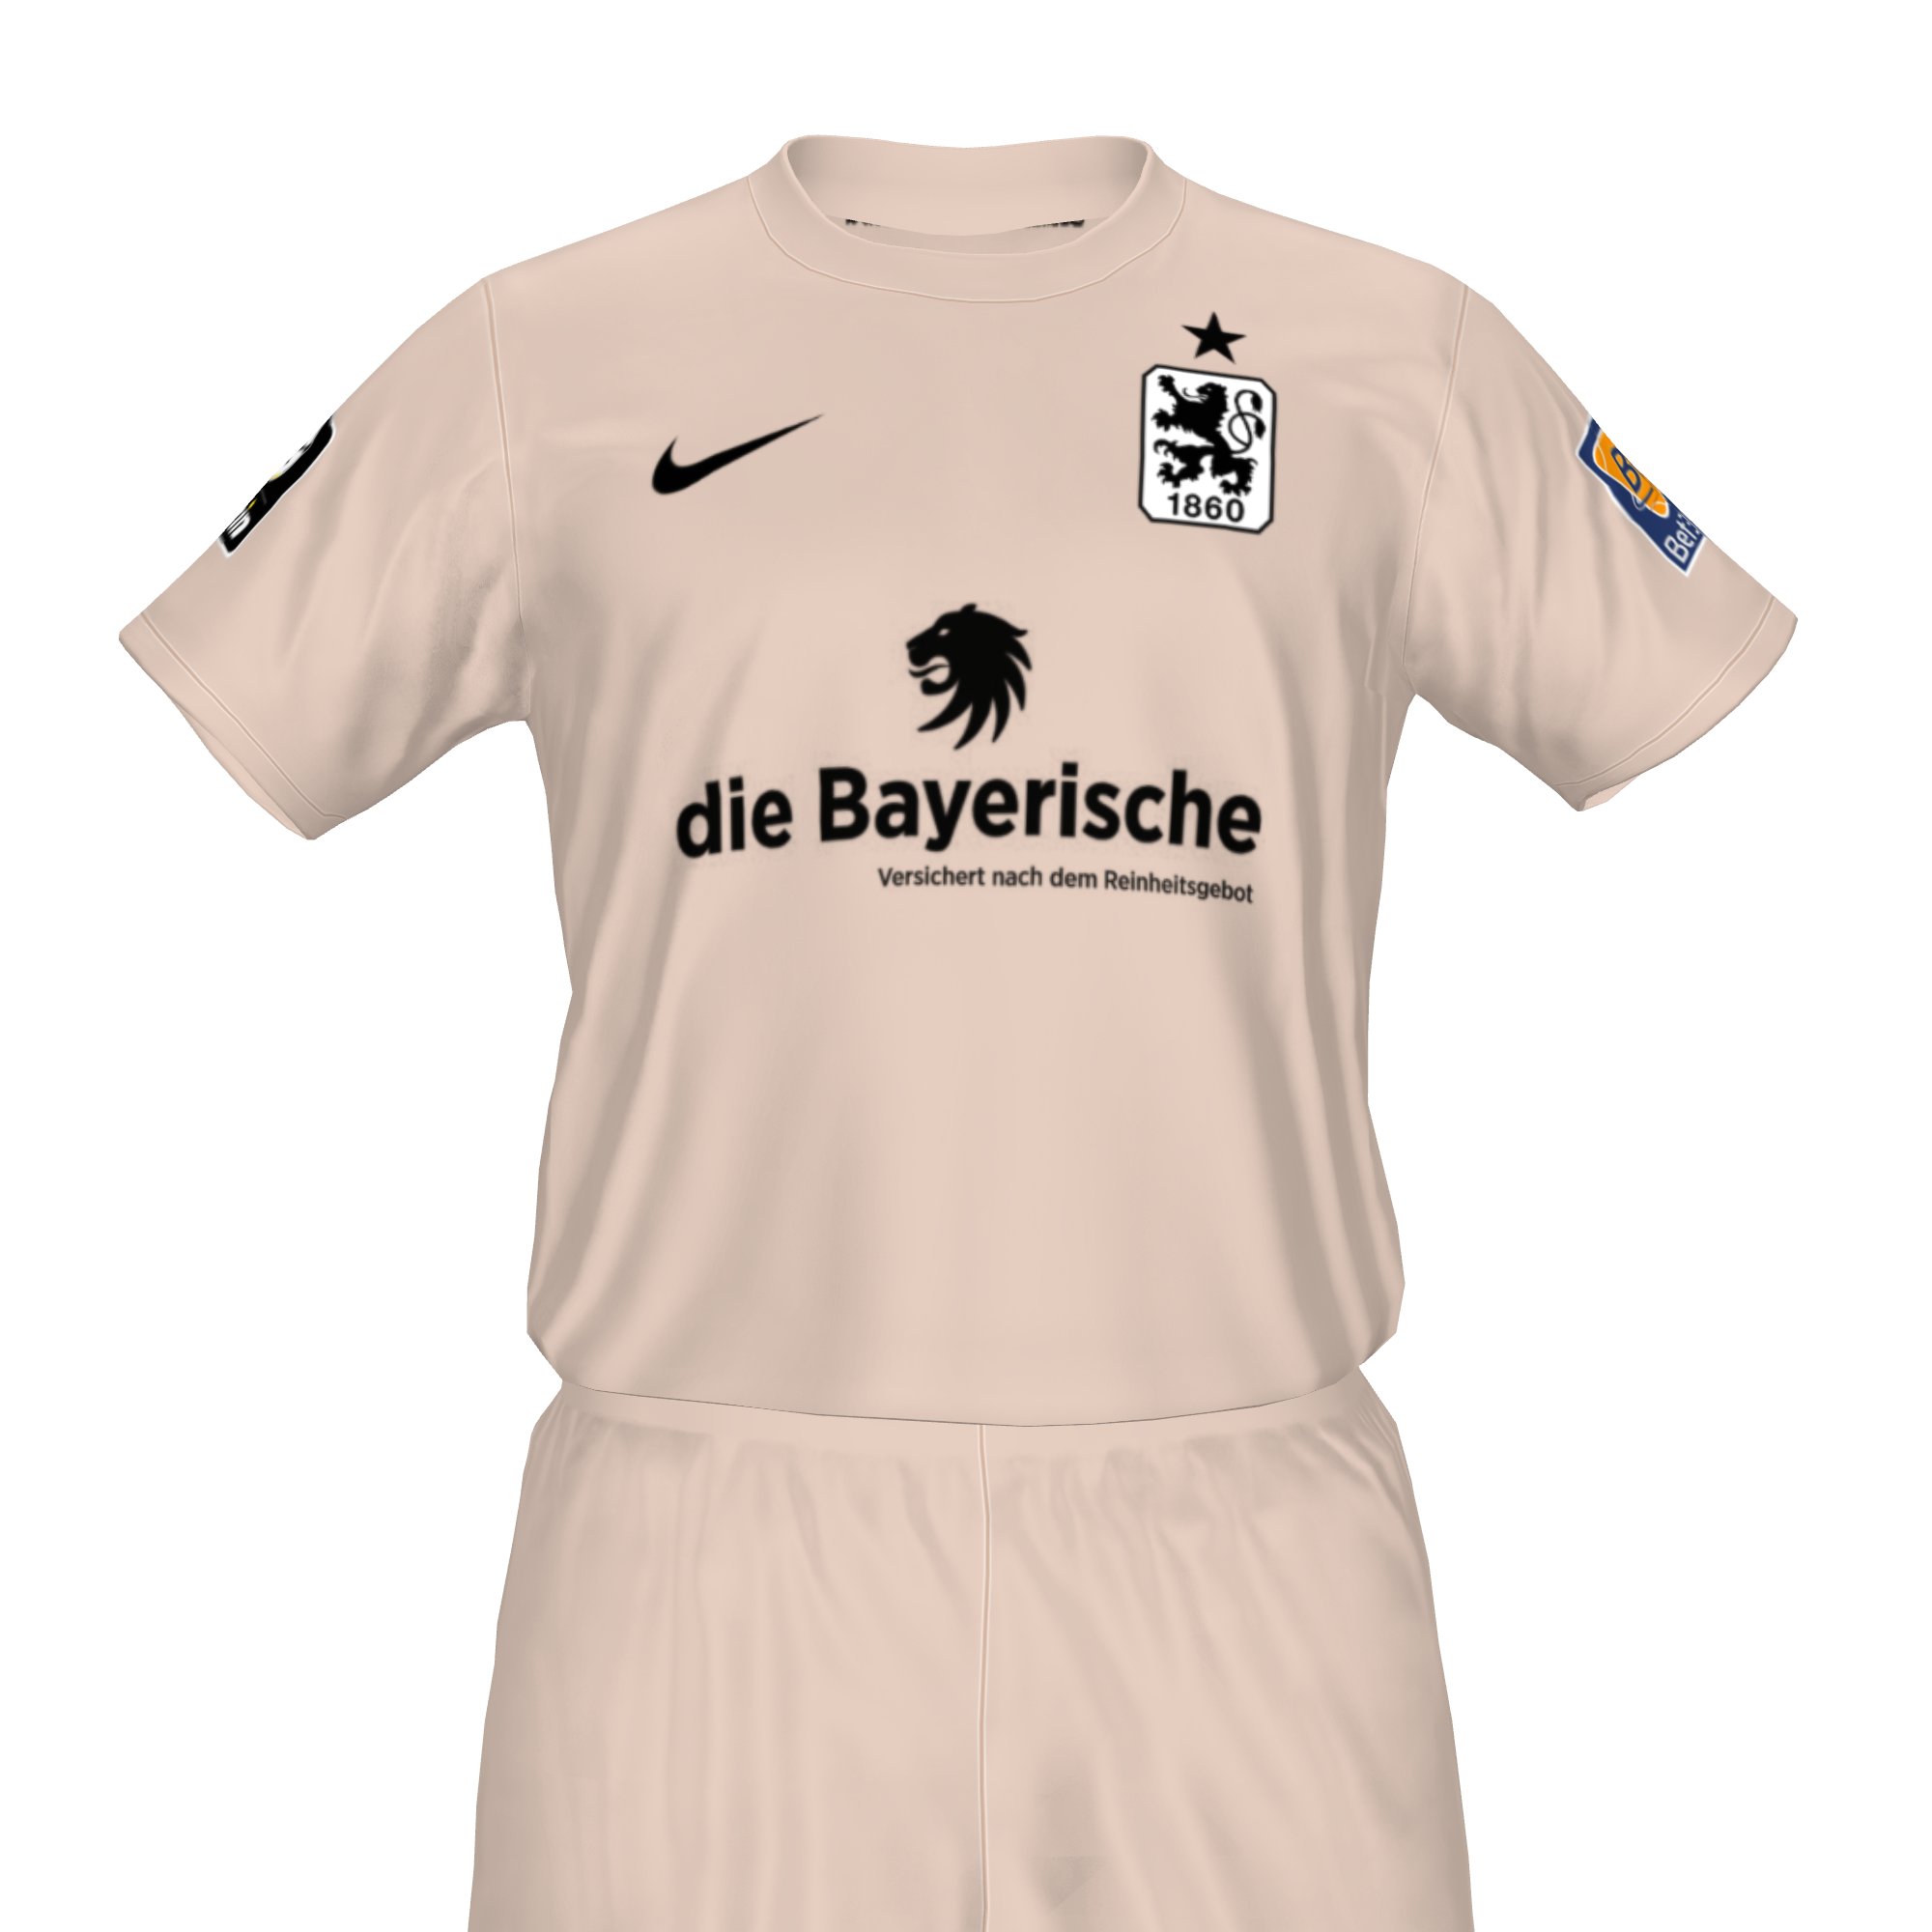 REQUESTED] 1860 Munich 20-21 Home, Away, 3RD and GK (All kits made by Lemon  & Swahl @PES GALAXY) : r/WEPES_Kits